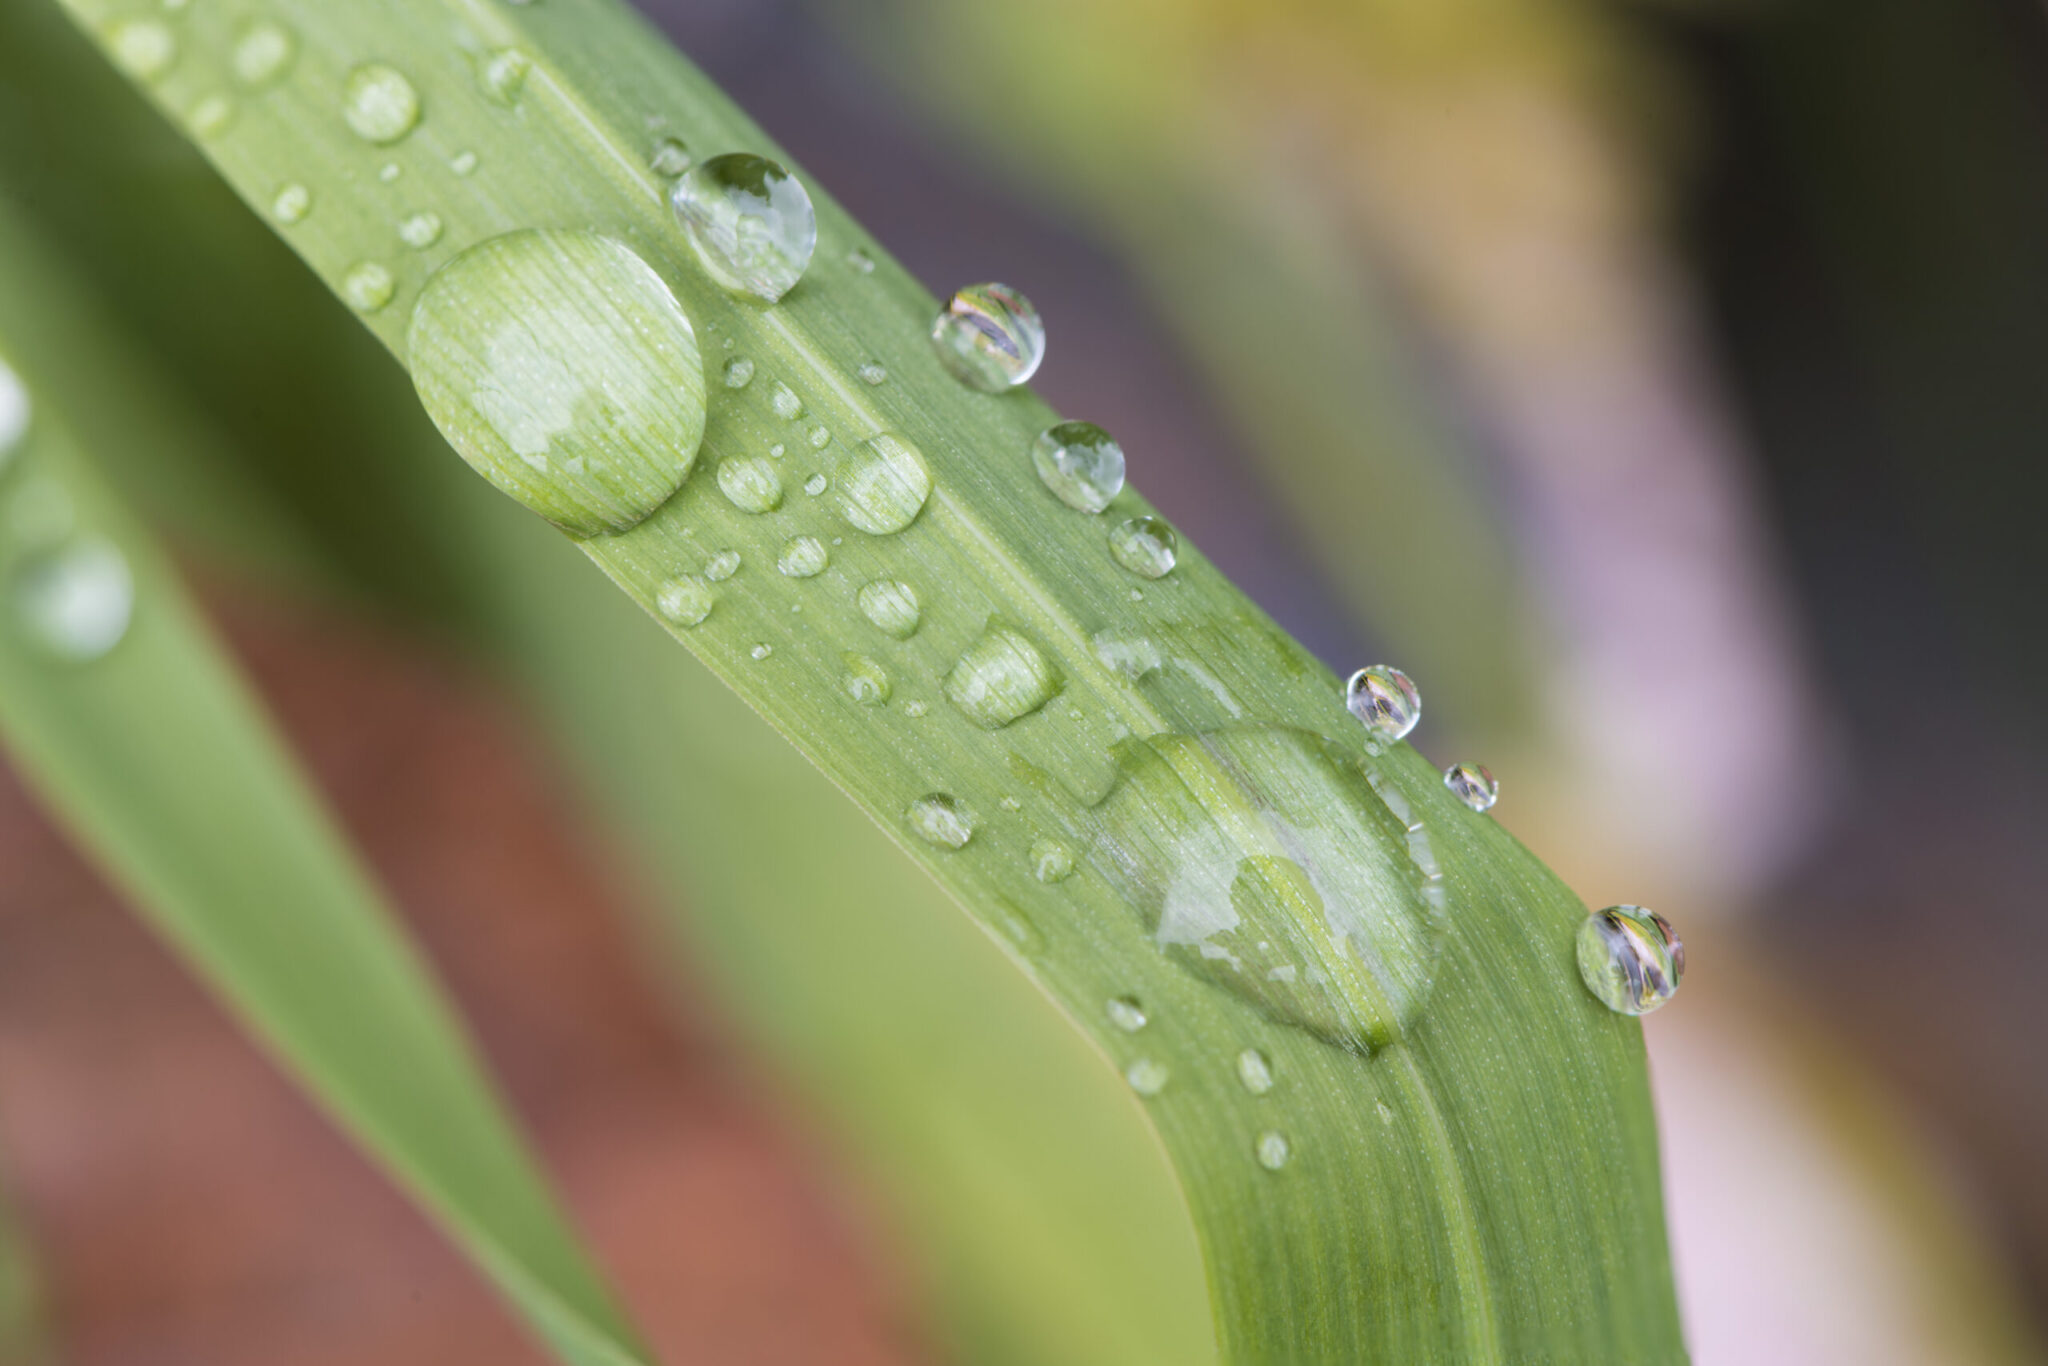 Grass Blade with Dew Drops